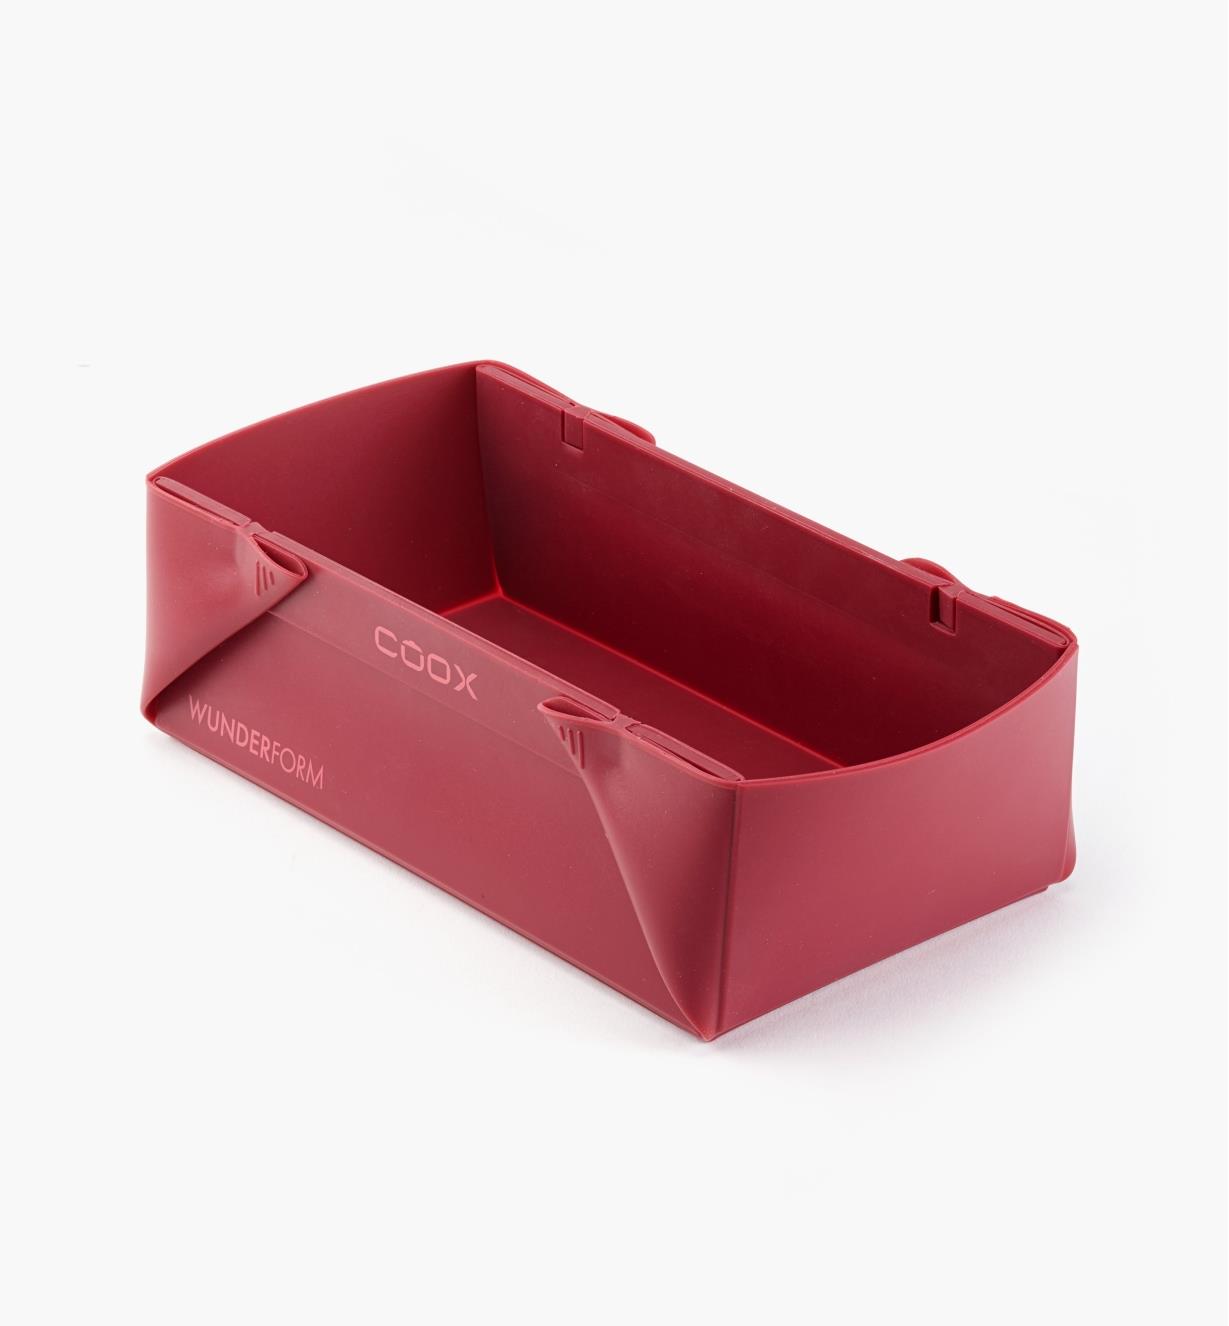 EV703 - Collapsible Silicone Loaf Pan, 8 1/2" × 4 1/2" × 2 3/4"